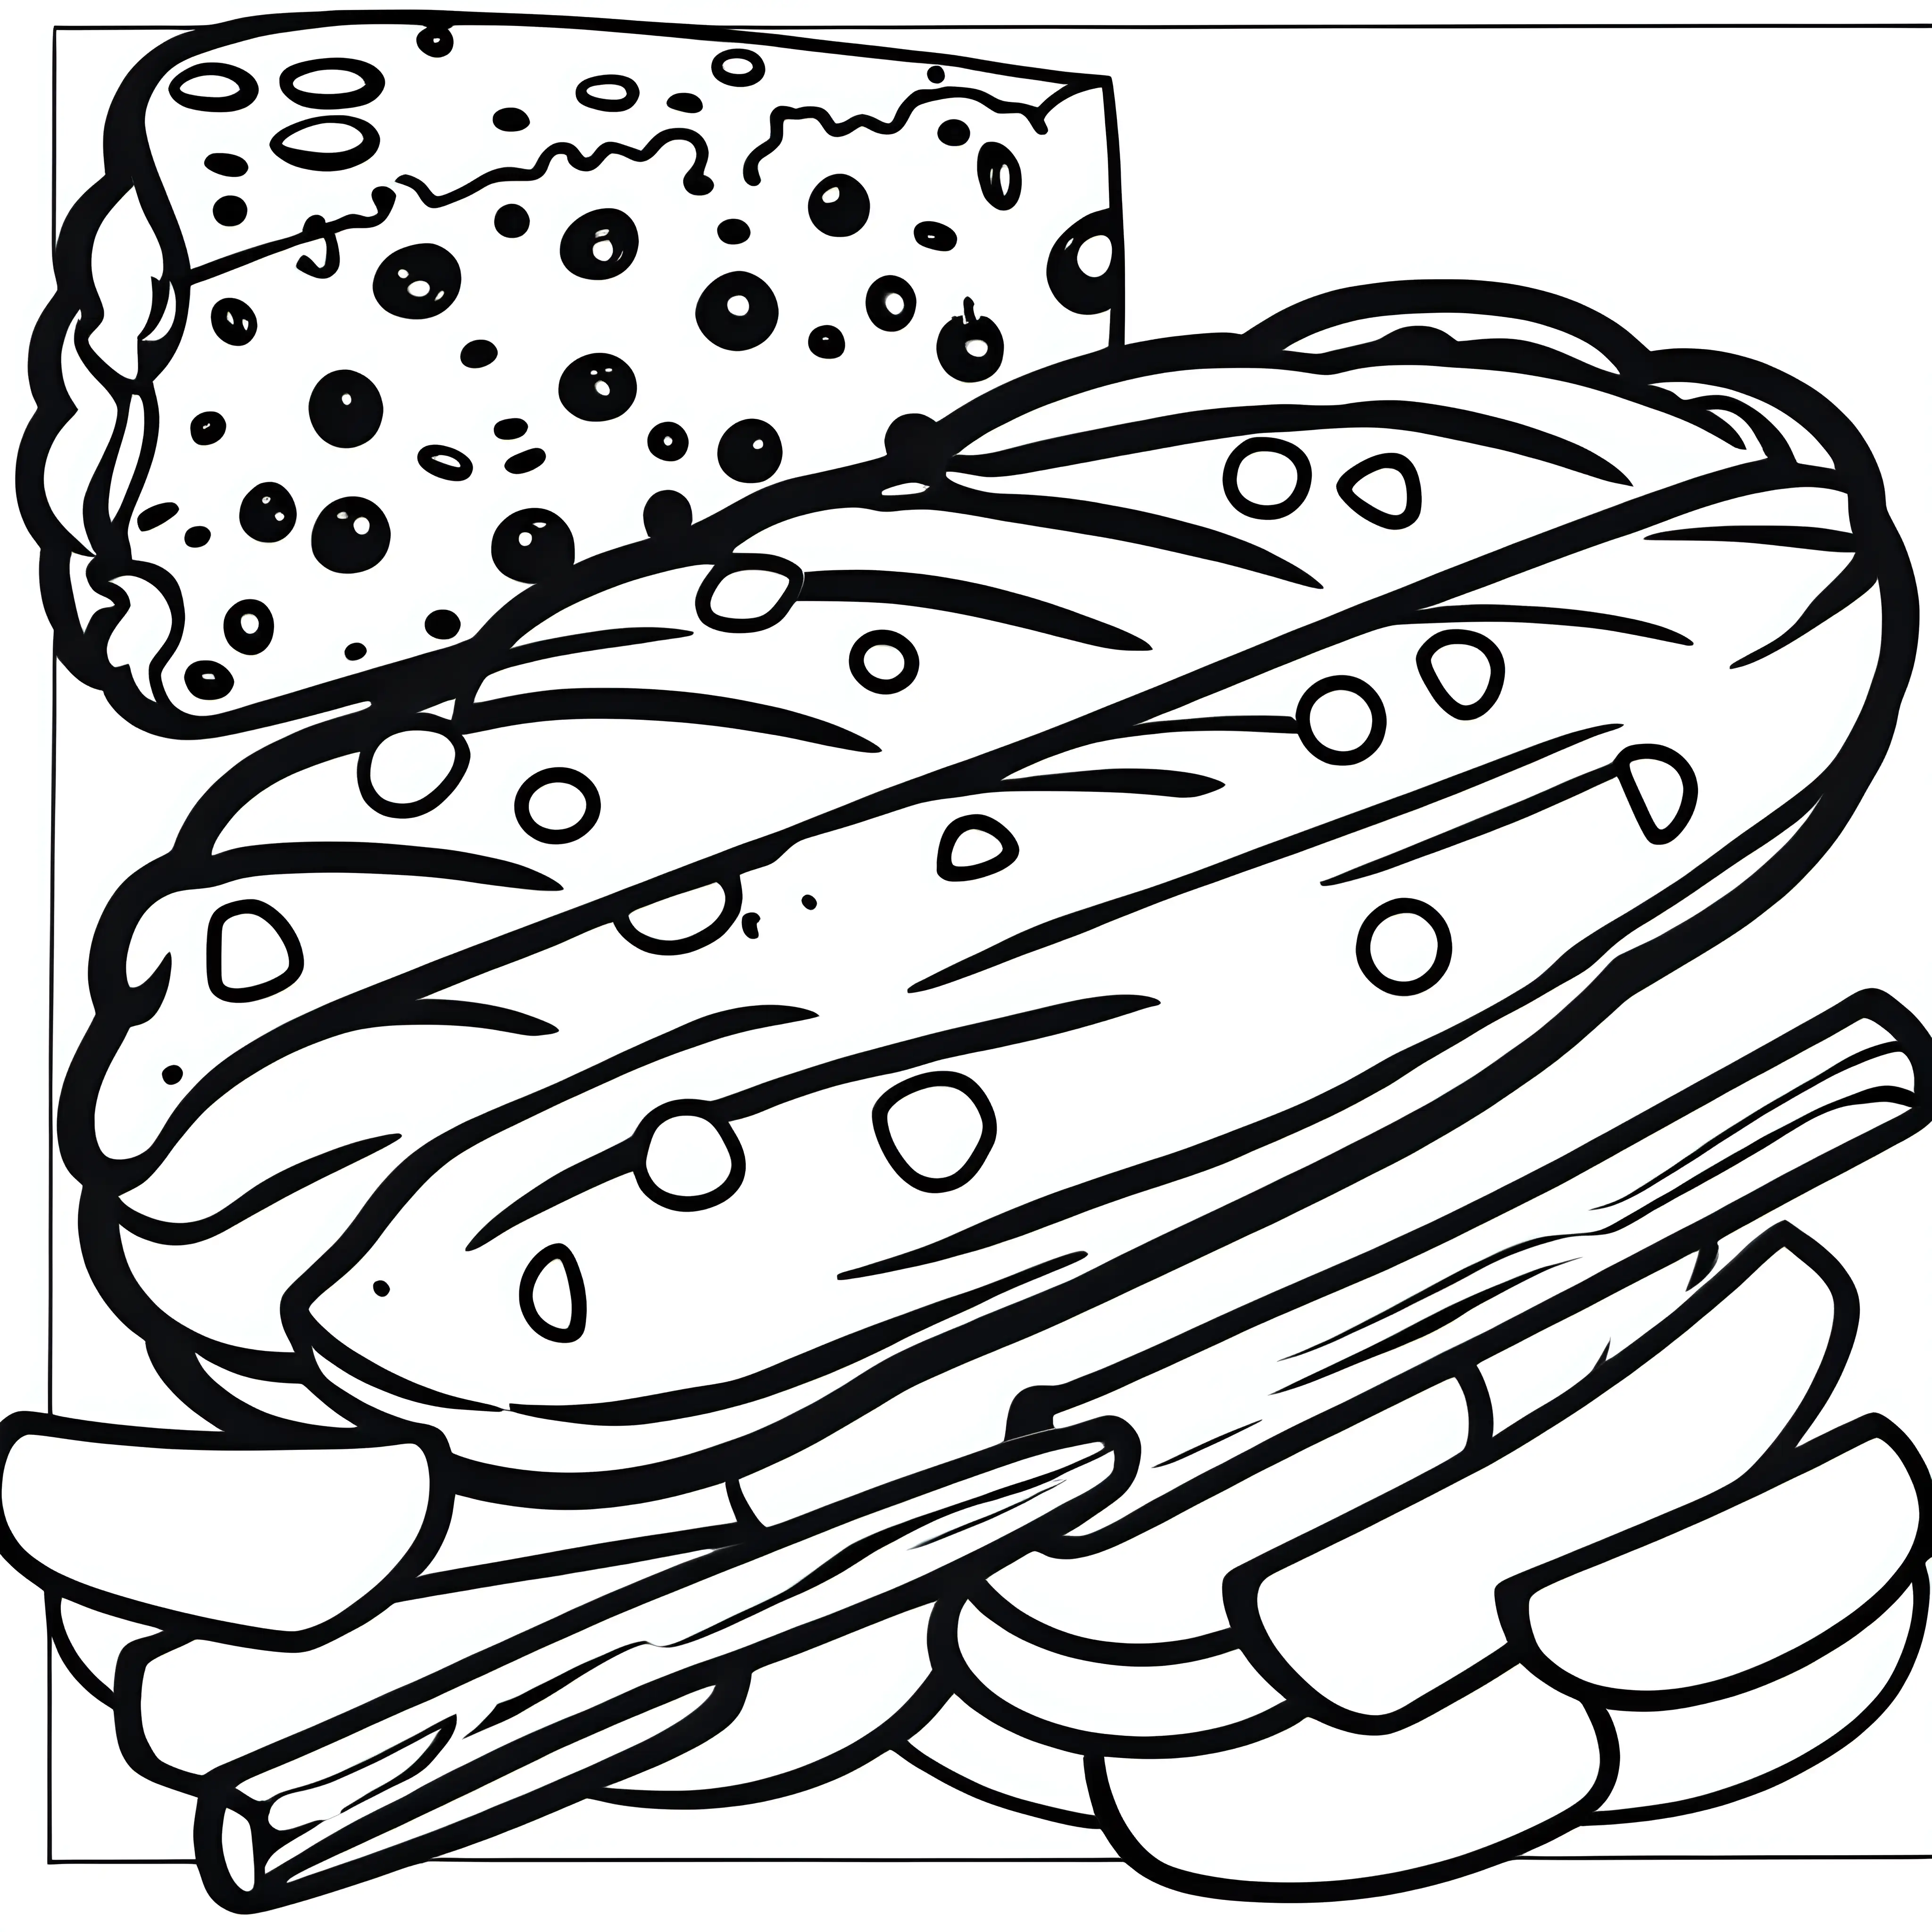 French Baguette and Cheese Coloring Page for Relaxation and Creativity